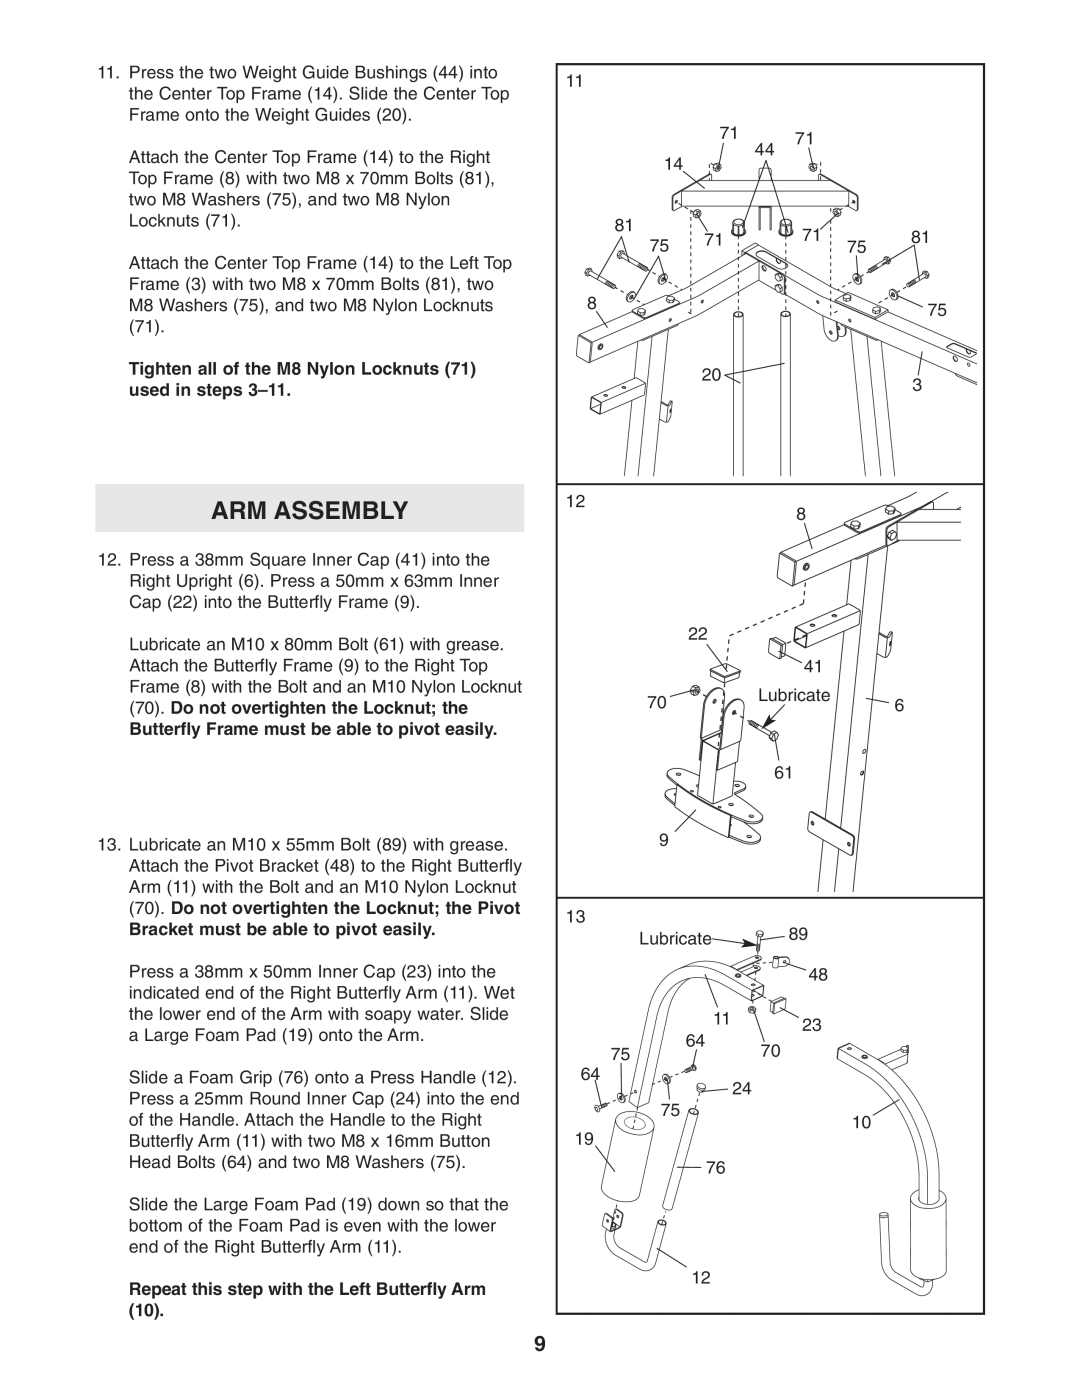 Weider 831.159822 user manual Arm Assembly, Tighten all of the M8 Nylon Locknuts 71 used in steps 